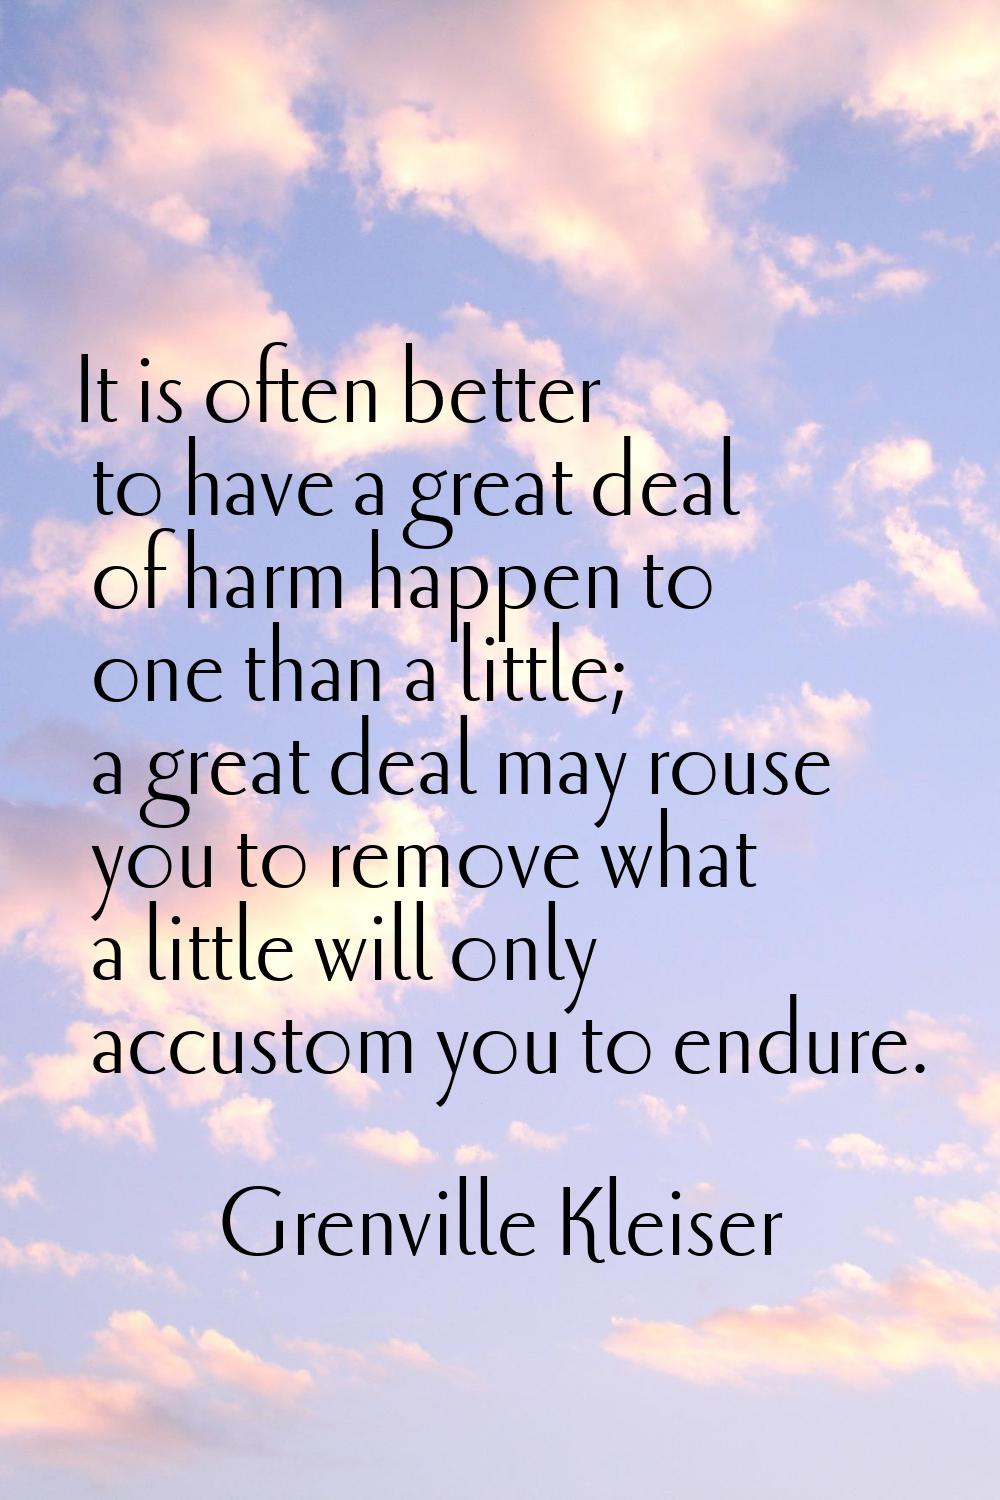 It is often better to have a great deal of harm happen to one than a little; a great deal may rouse